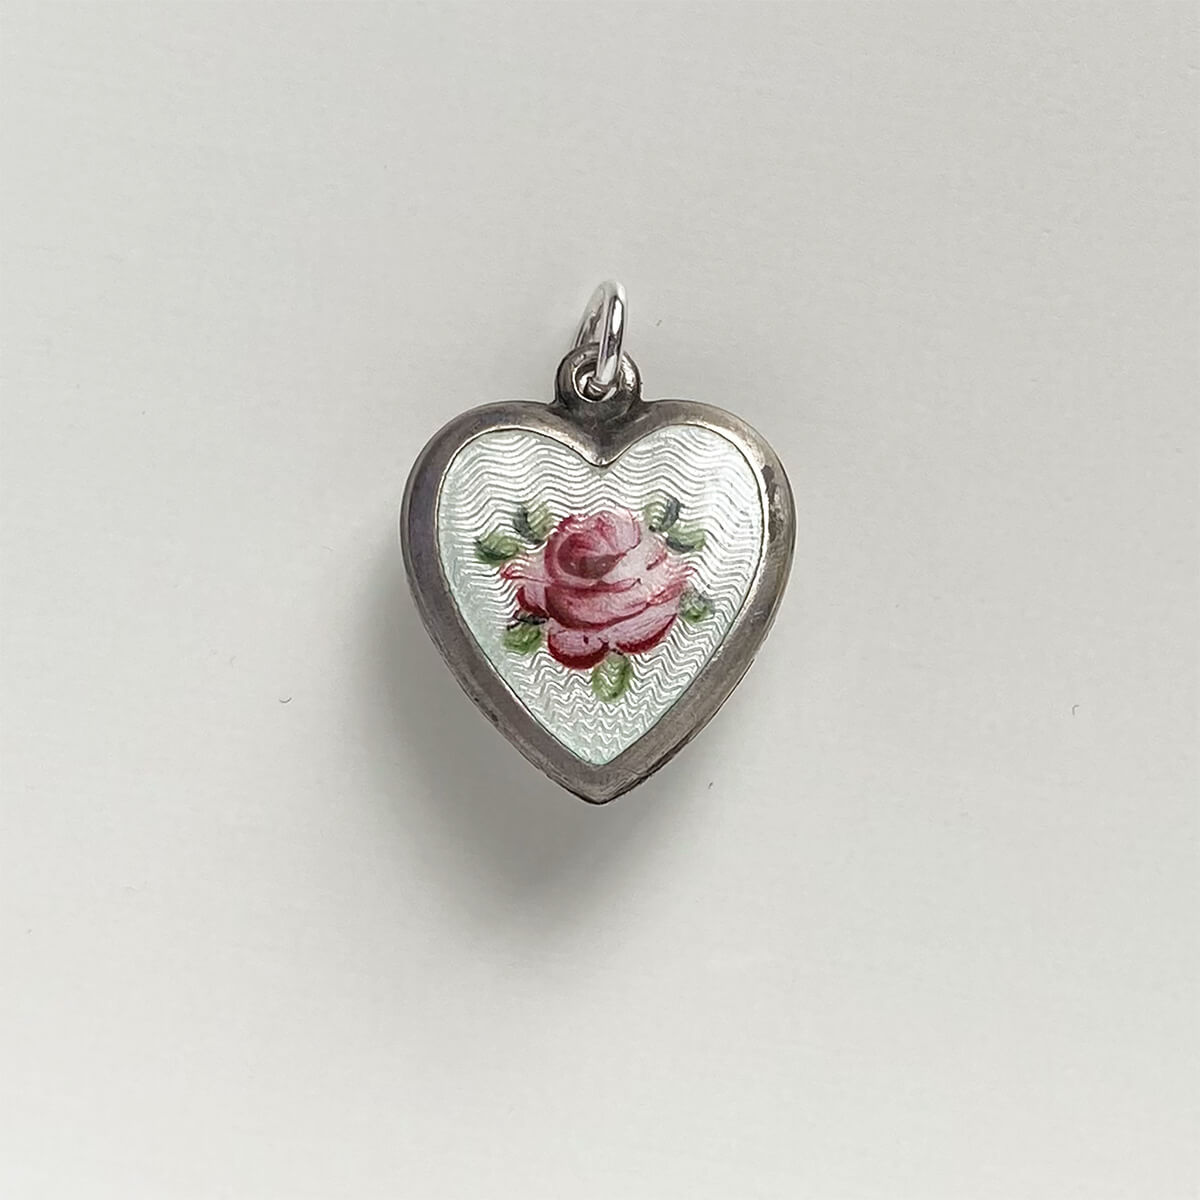 Vintage guilloche enamel puffy heart pendant with pink rose flower